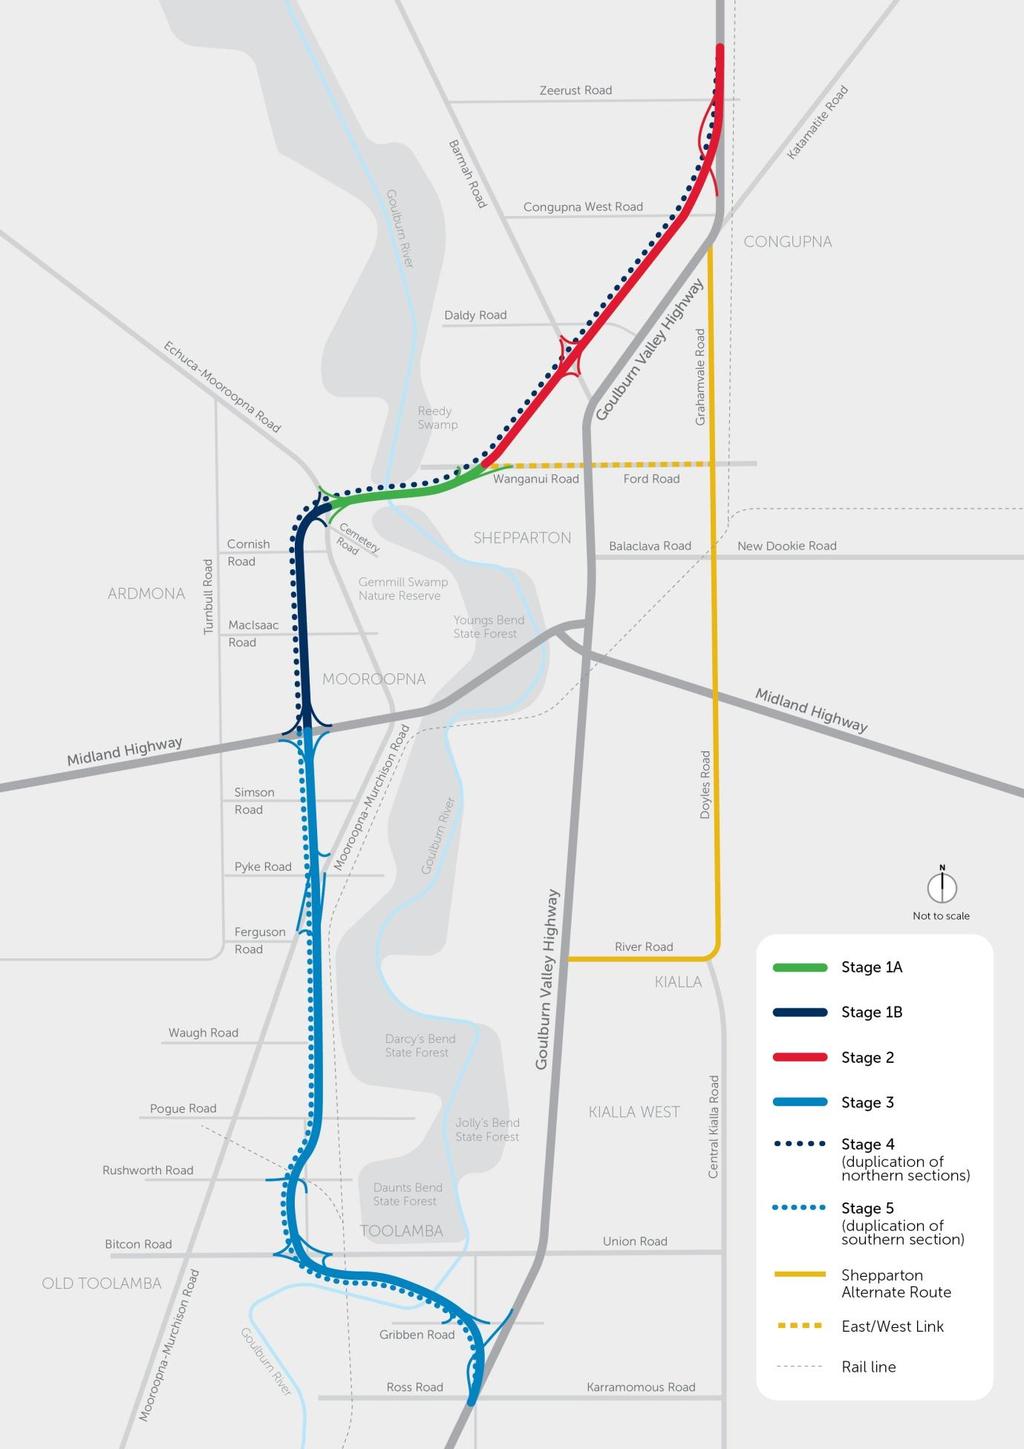 Figure 3: Staged Shepparton Bypass, highlighting the Shepparton Alternate Route and East West link along Ford Road and Wanganui Road 16.